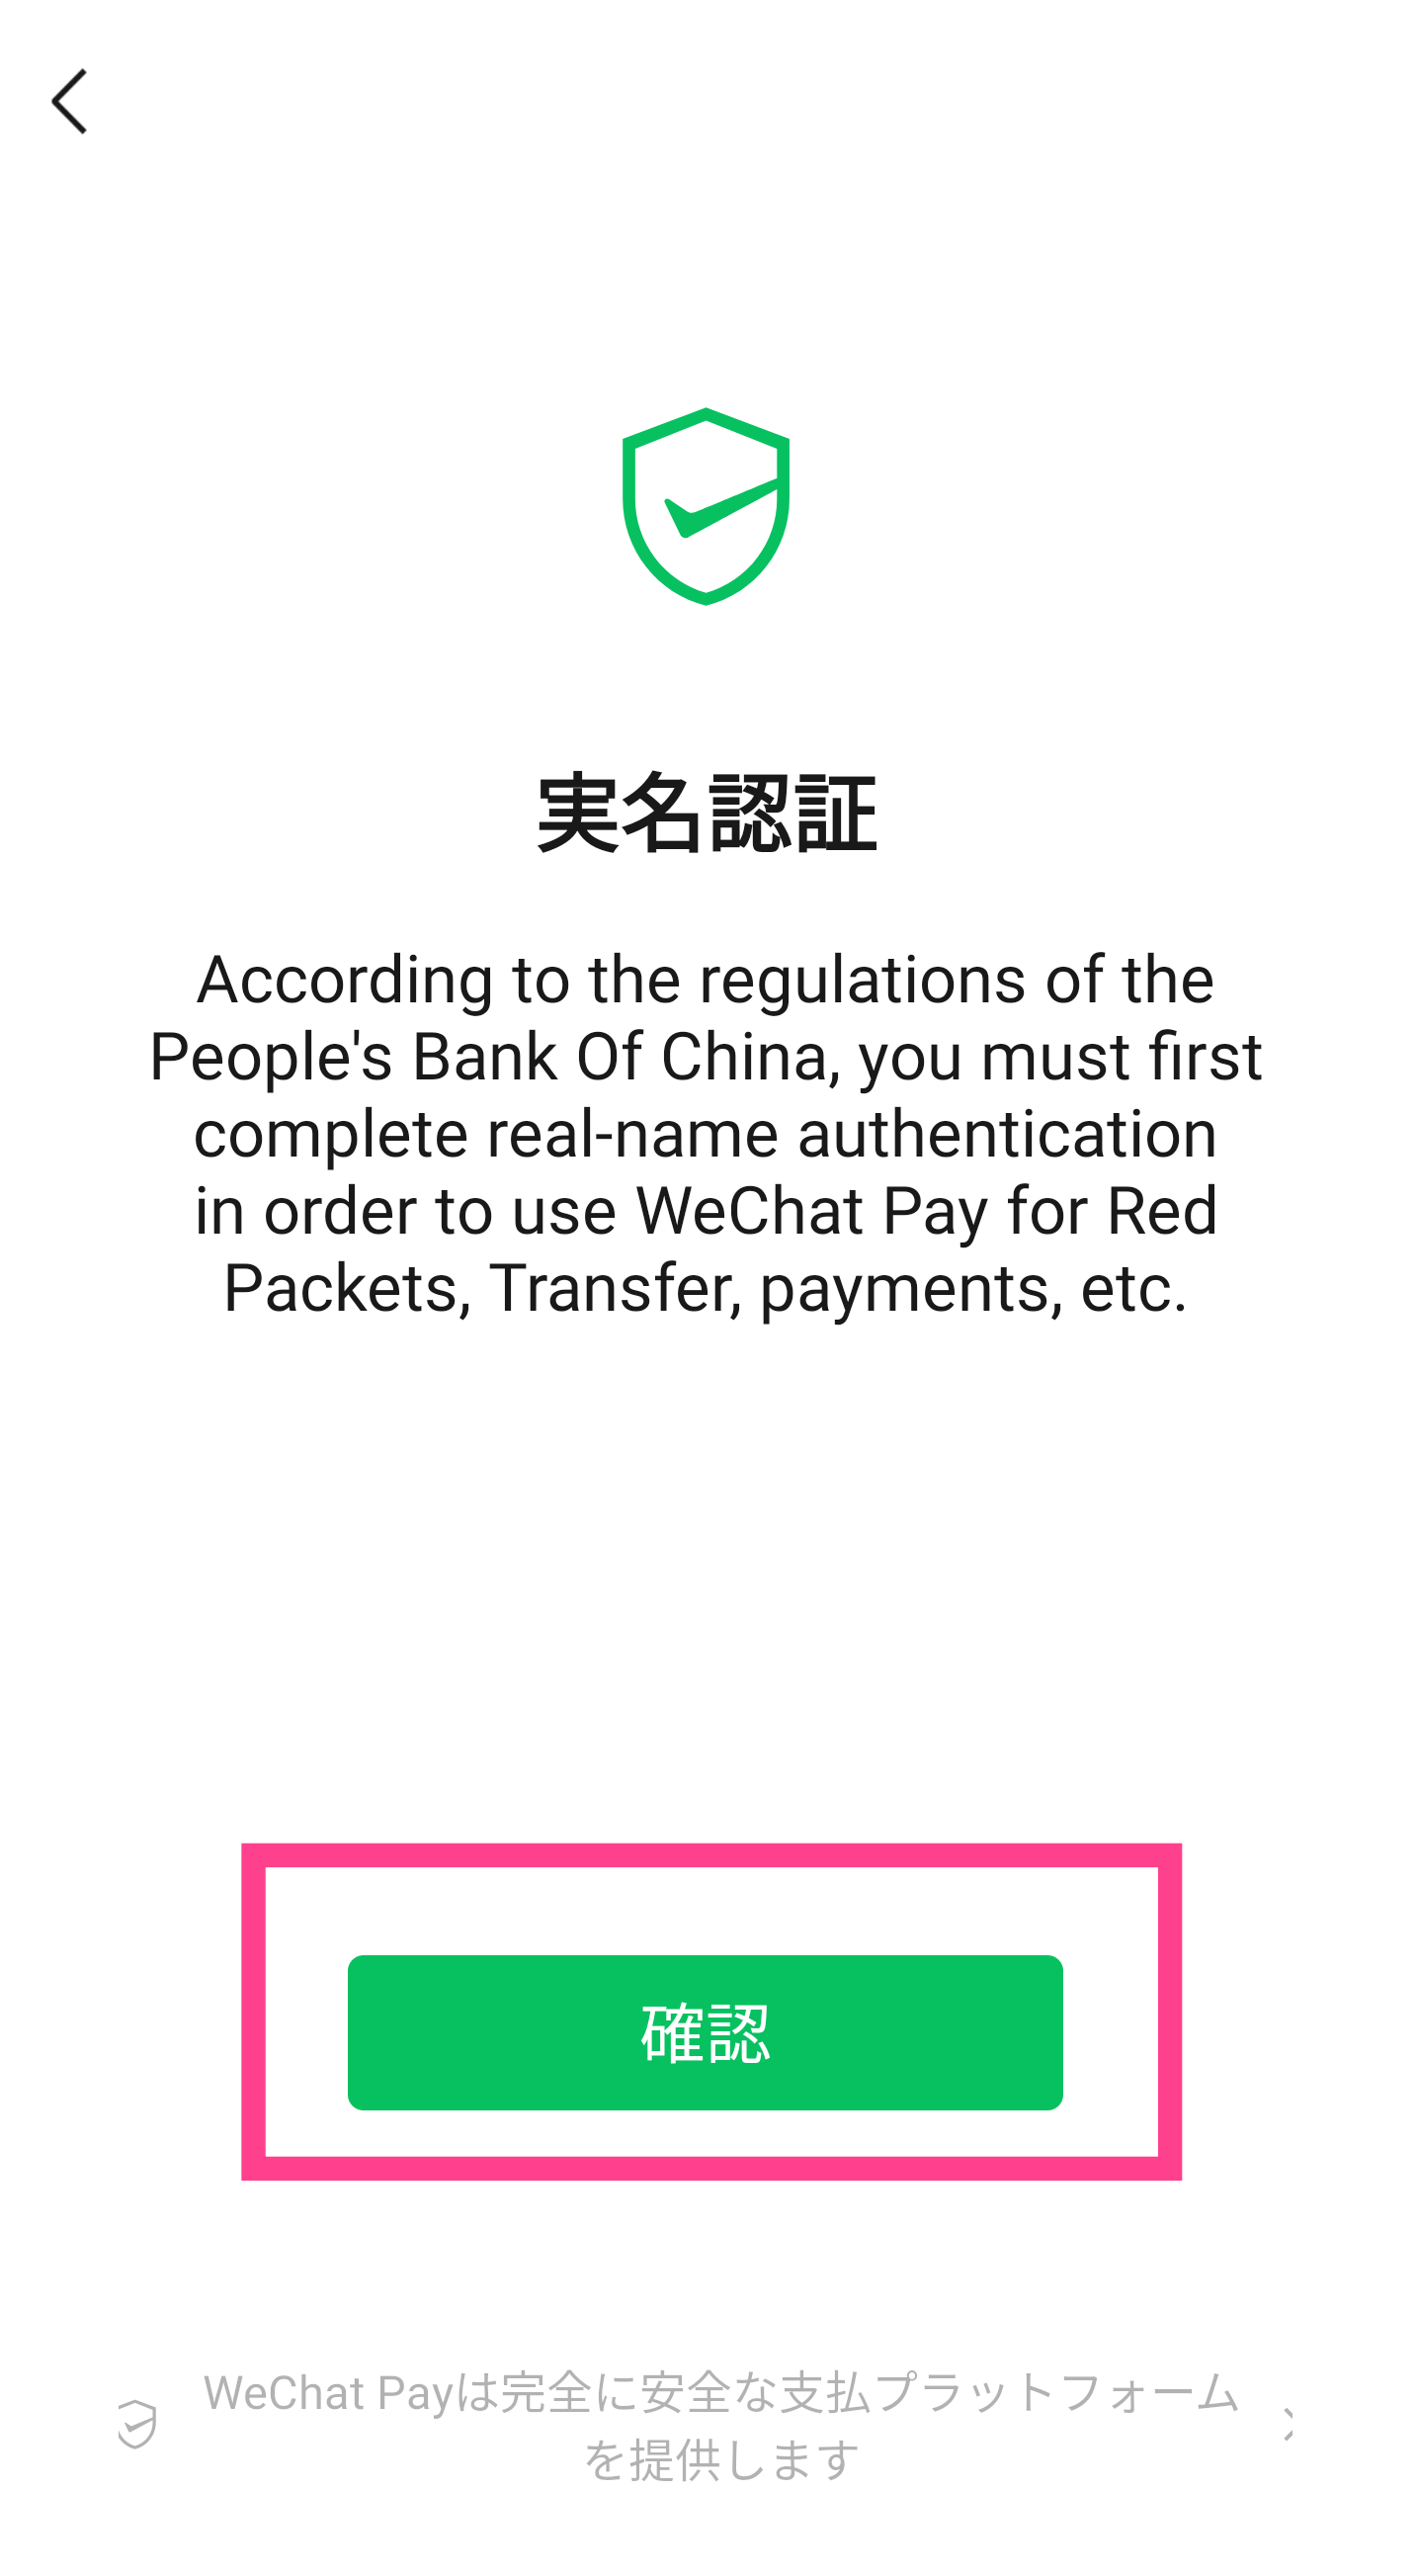 WeChatPay実名認証